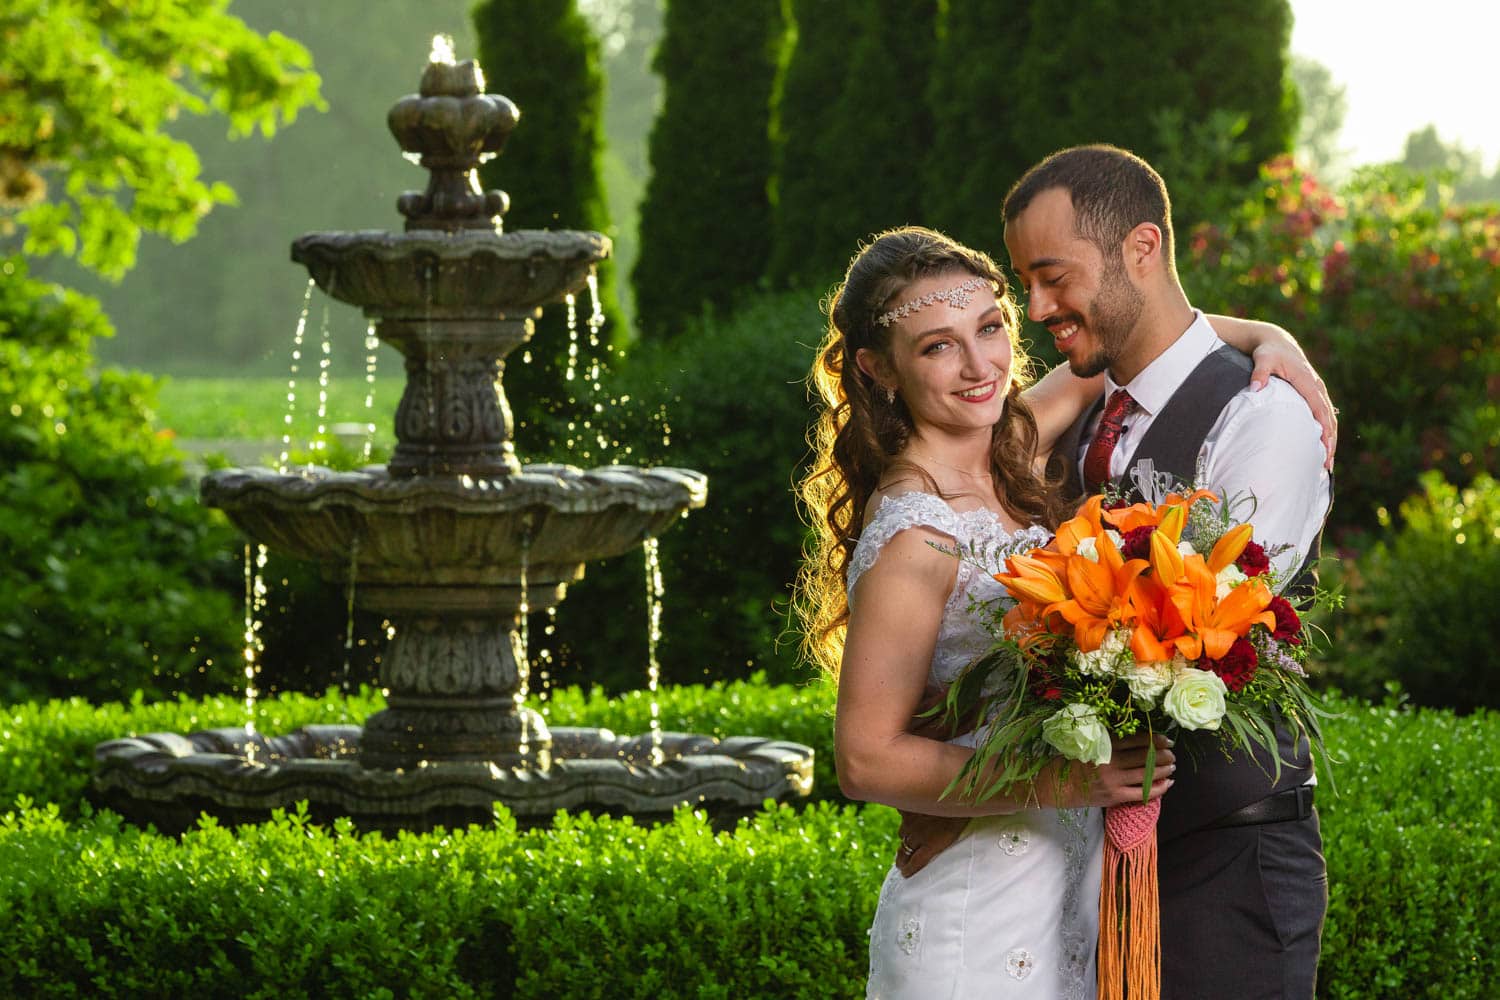 Bride and groom pose next to the fountain at Laurel Creek Manor during golden hour.